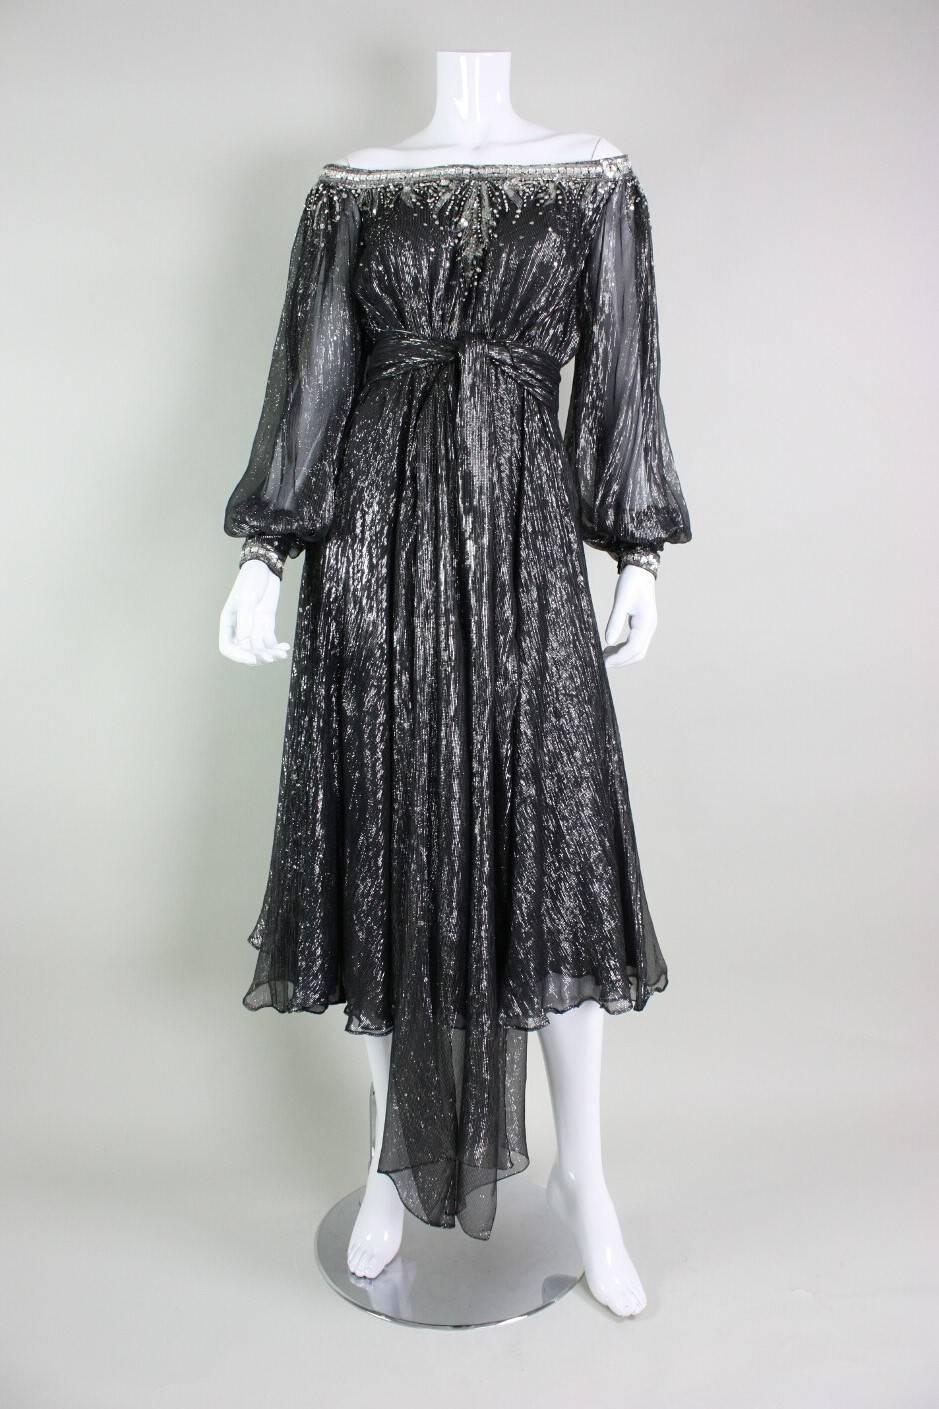 Vintage party dress from Nolan Miller dates to the 1970's through early 1980's. It is made of black chiffon with a silver lurex pinstripe. Neckline is off the shoulders and trimmed with sequins, bugle beads, and square rhinestones.  Flame-like